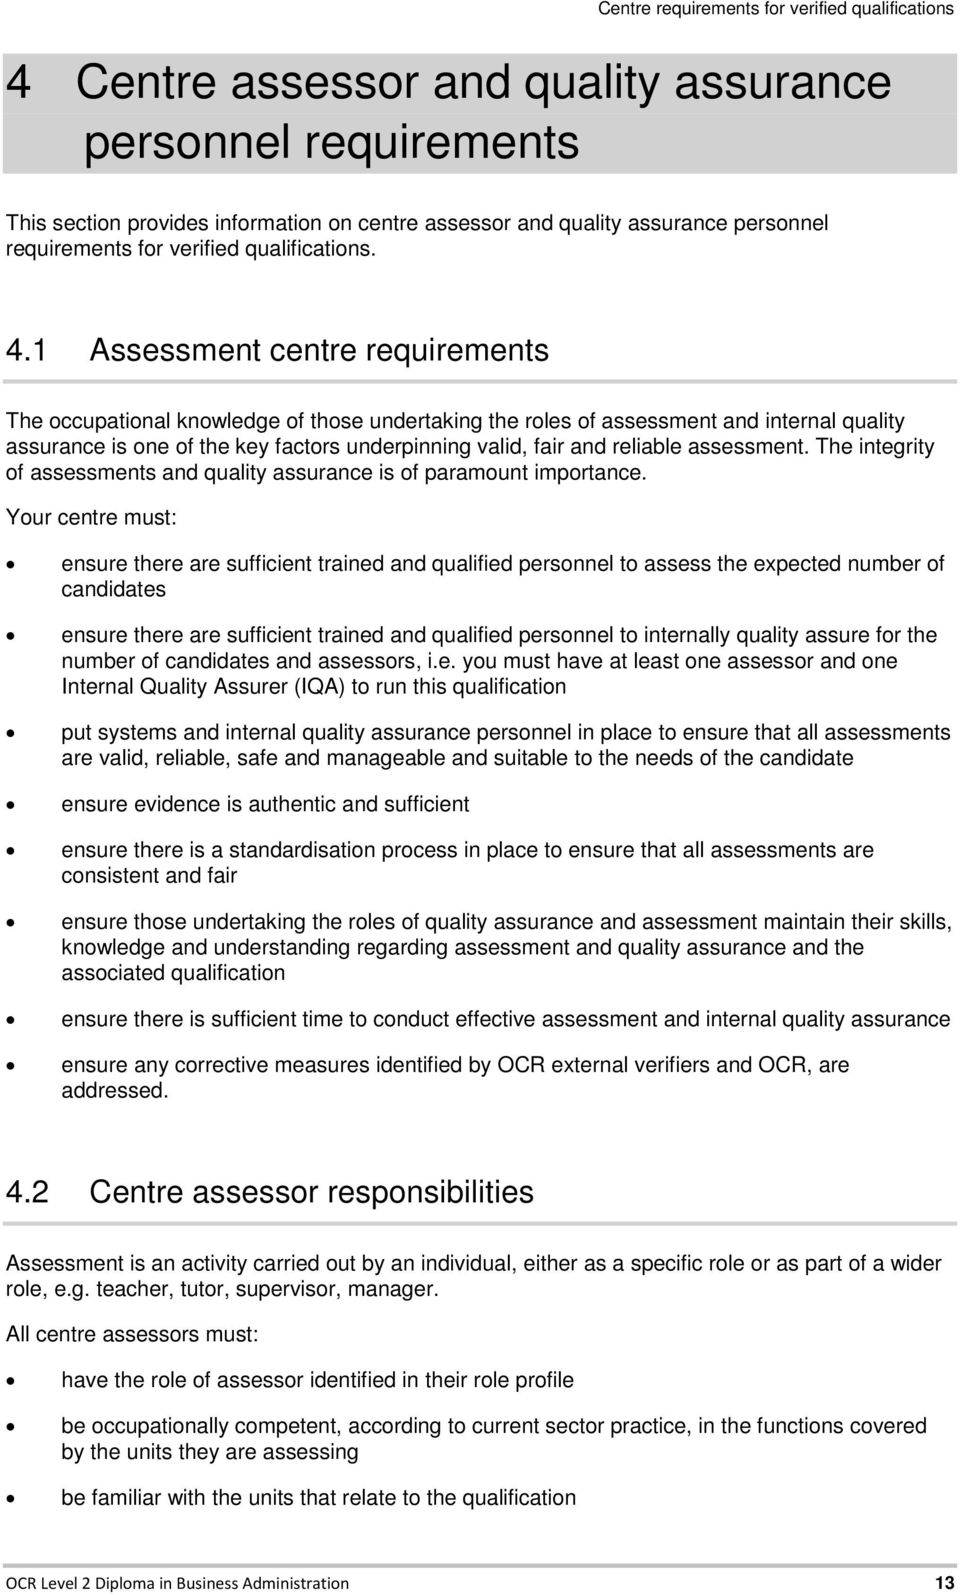 1 Assessment centre requirements The occupational knowledge of those undertaking the roles of assessment and internal quality assurance is one of the key factors underpinning valid, fair and reliable